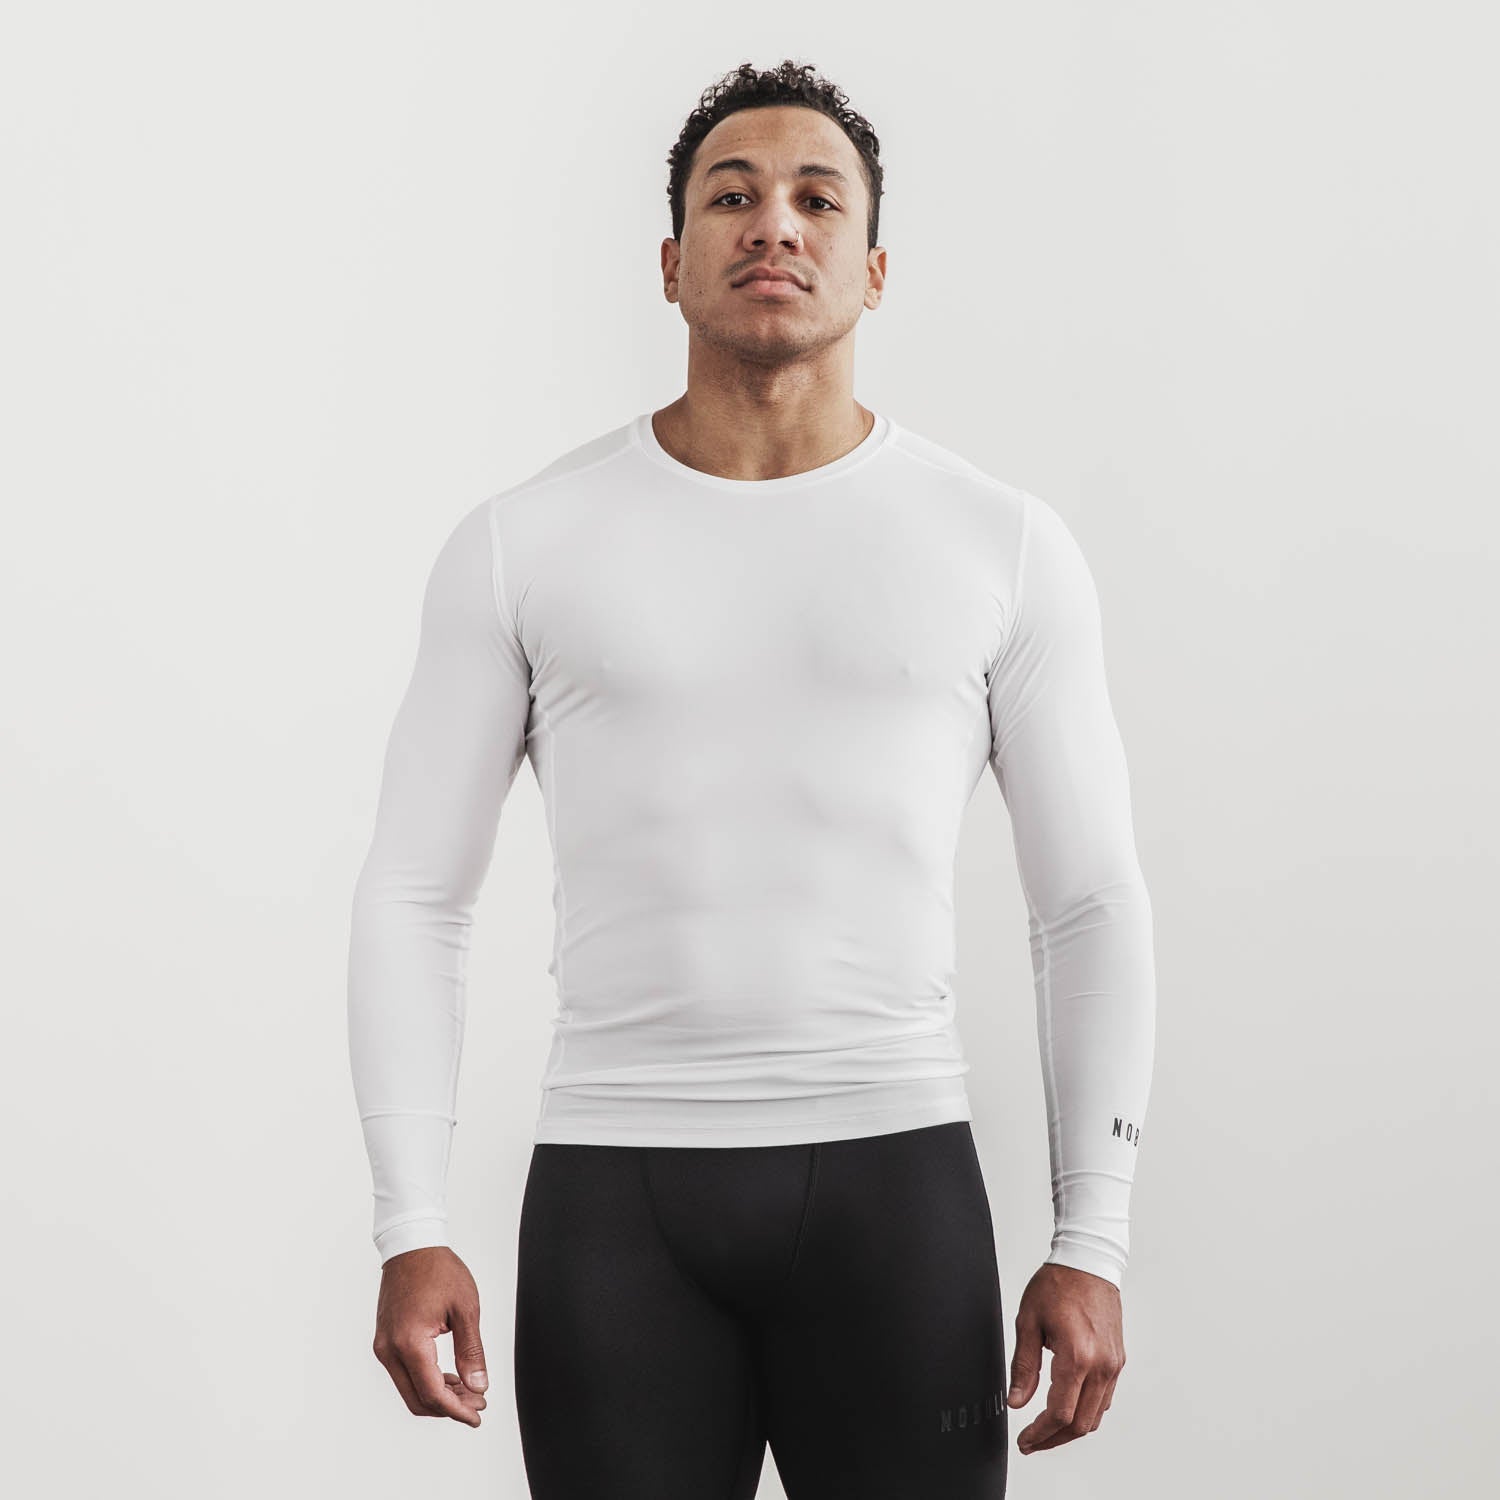 Men's Long Sleeve Fitness Compression Shirt